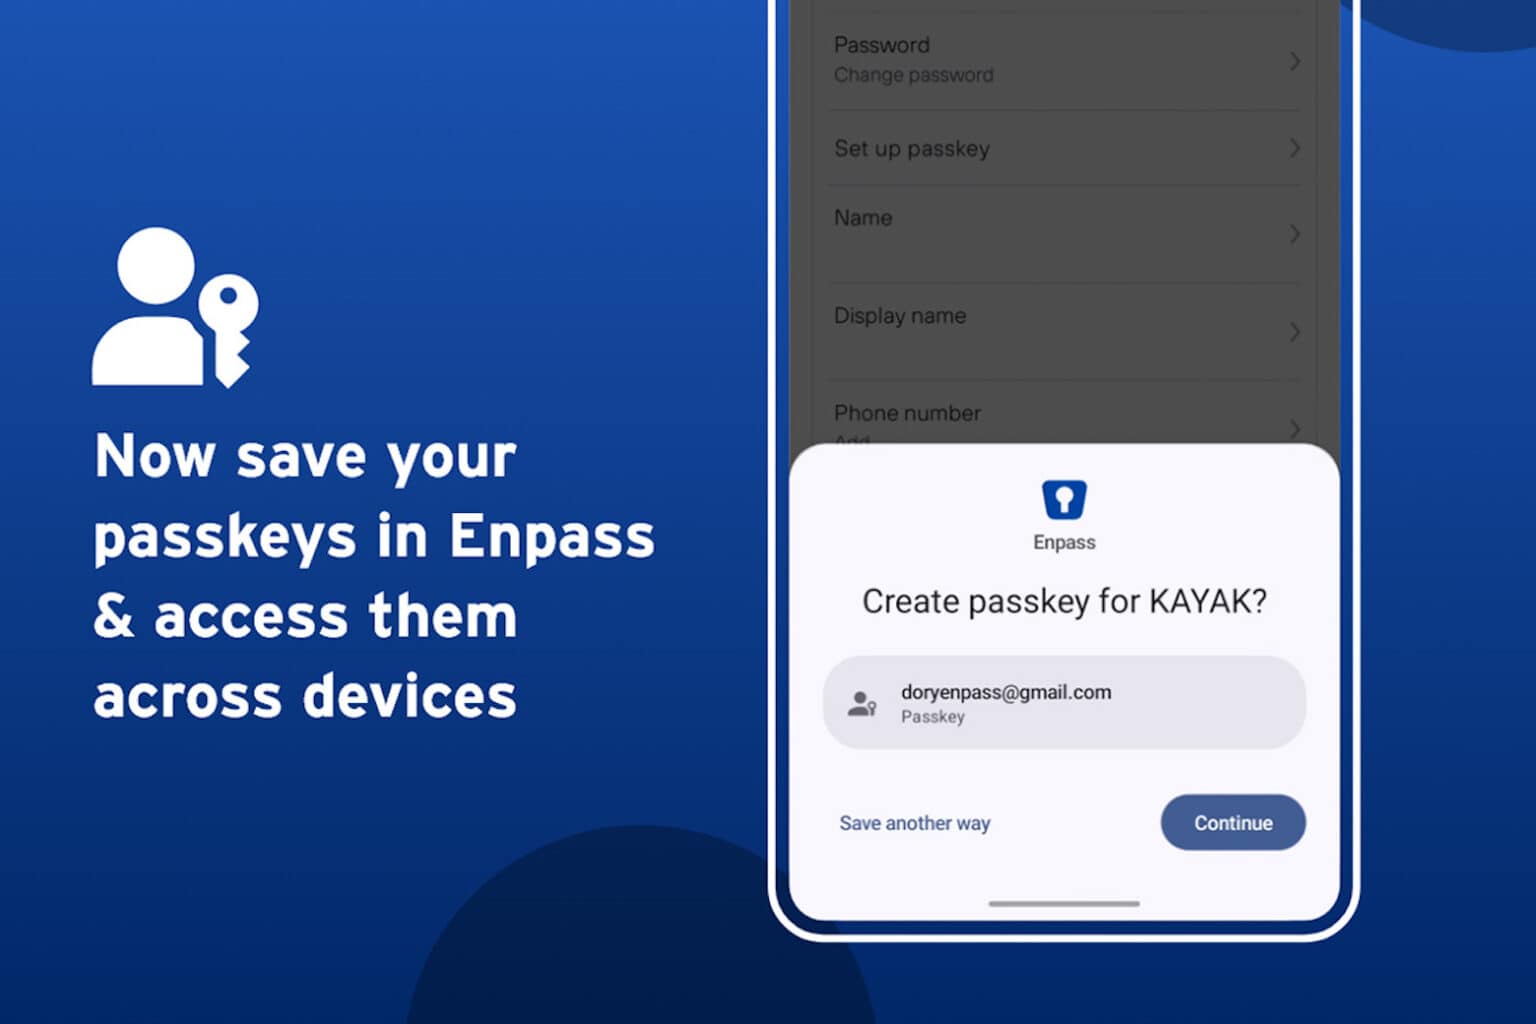 A Cyber steal: This one-year subscription for Enpass password management is only $15.